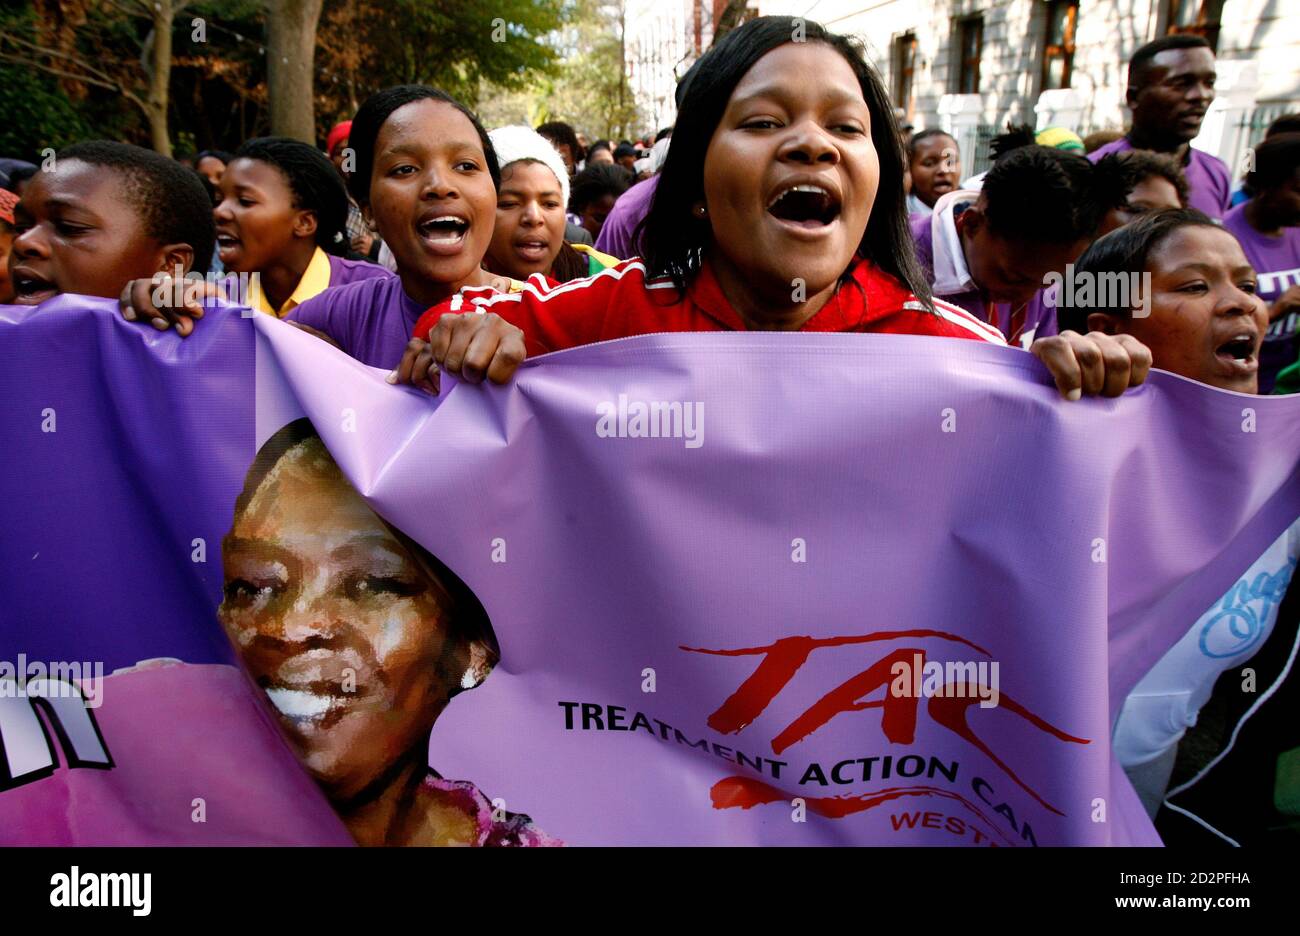 AIDS activists demonstrate in support of axed deputy health minister Nozizwe Madlala-Routledge in Cape Town August 29, 2007. Earlier this month President Thabo Mbeki dismissed Madlala-Routledge, who has won widespread praise for her outspoken approach to tackling AIDS and HIV.  REUTERS/Mike Hutchings (SOUTH AFRICA) Stock Photo